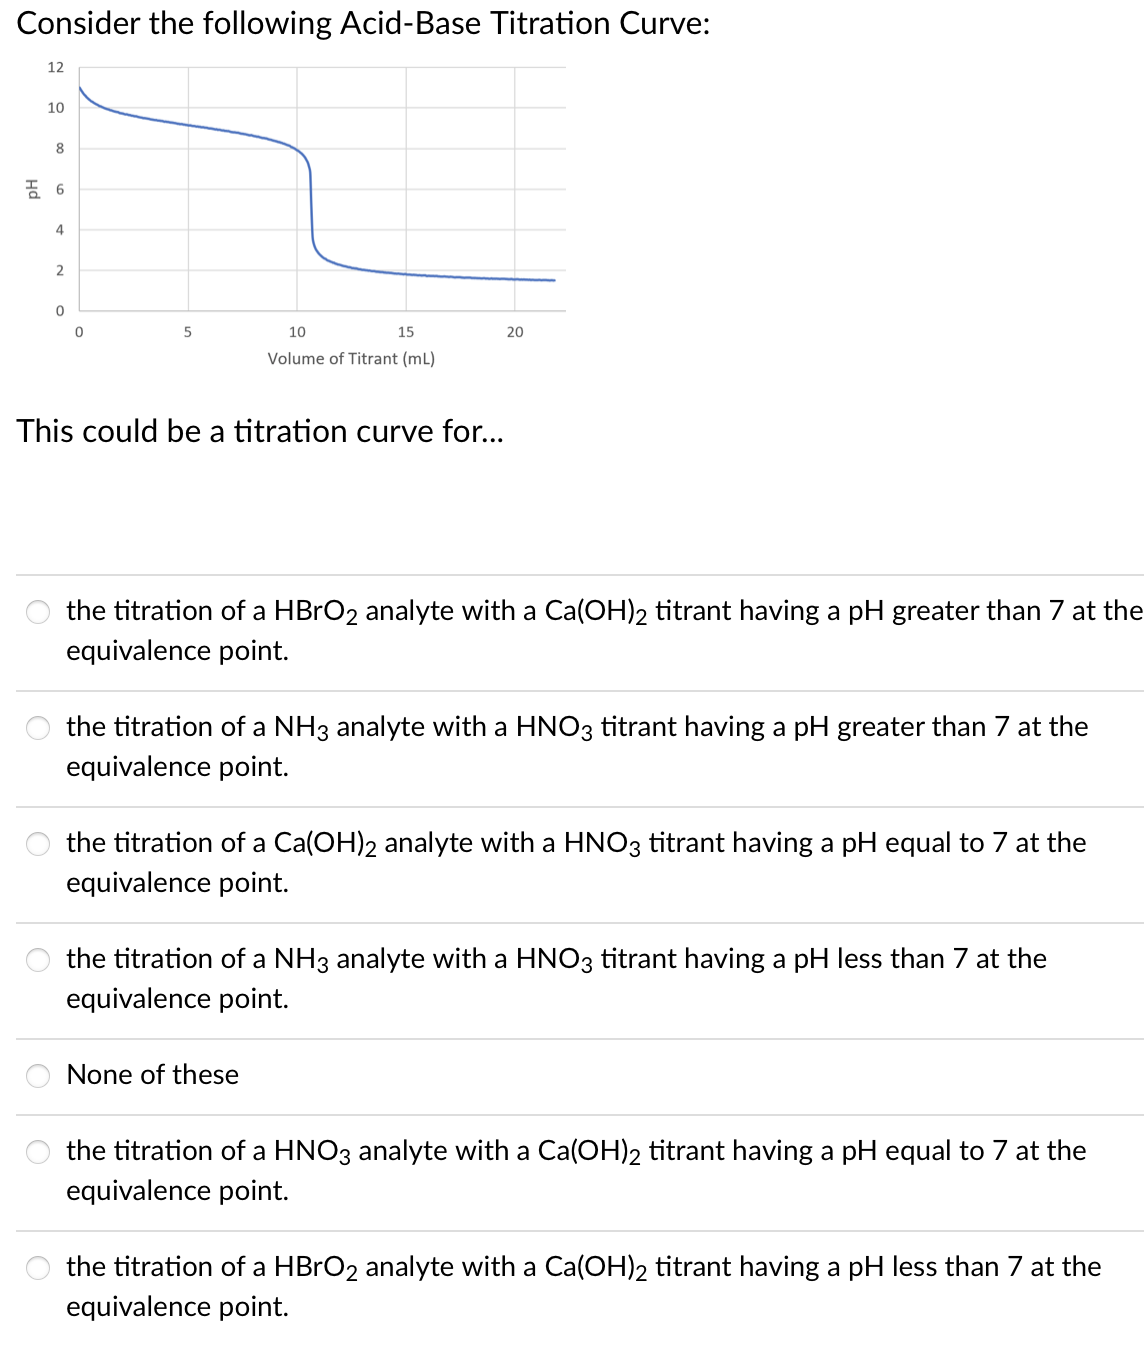 Consider the following Acid-Base Titration Curve:
12
10
8
공 6
4
10
15
20
Volume of Titrant (mL)
This could be a titration curve for...
the titration of a HBRO2 analyte with a Ca(OH)2 titrant having a pH greater than 7 at the
equivalence point.
the titration of a NH3 analyte with a HNO3 titrant having a pH greater than 7 at the
equivalence point.
the titration of a Ca(OH)2 analyte with a HNO3 titrant having a pH equal to 7 at the
equivalence point.
the titration of a NH3 analyte with a HNO3 titrant having a pH less than 7 at the
equivalence point.
None of these
the titration of a HNO3 analyte with a Ca(OH)2 titrant having a pH equal to 7 at the
equivalence point.
the titration of a HBRO2 analyte with a Ca(OH)2 titrant having a pH less than 7 at the
equivalence point.
